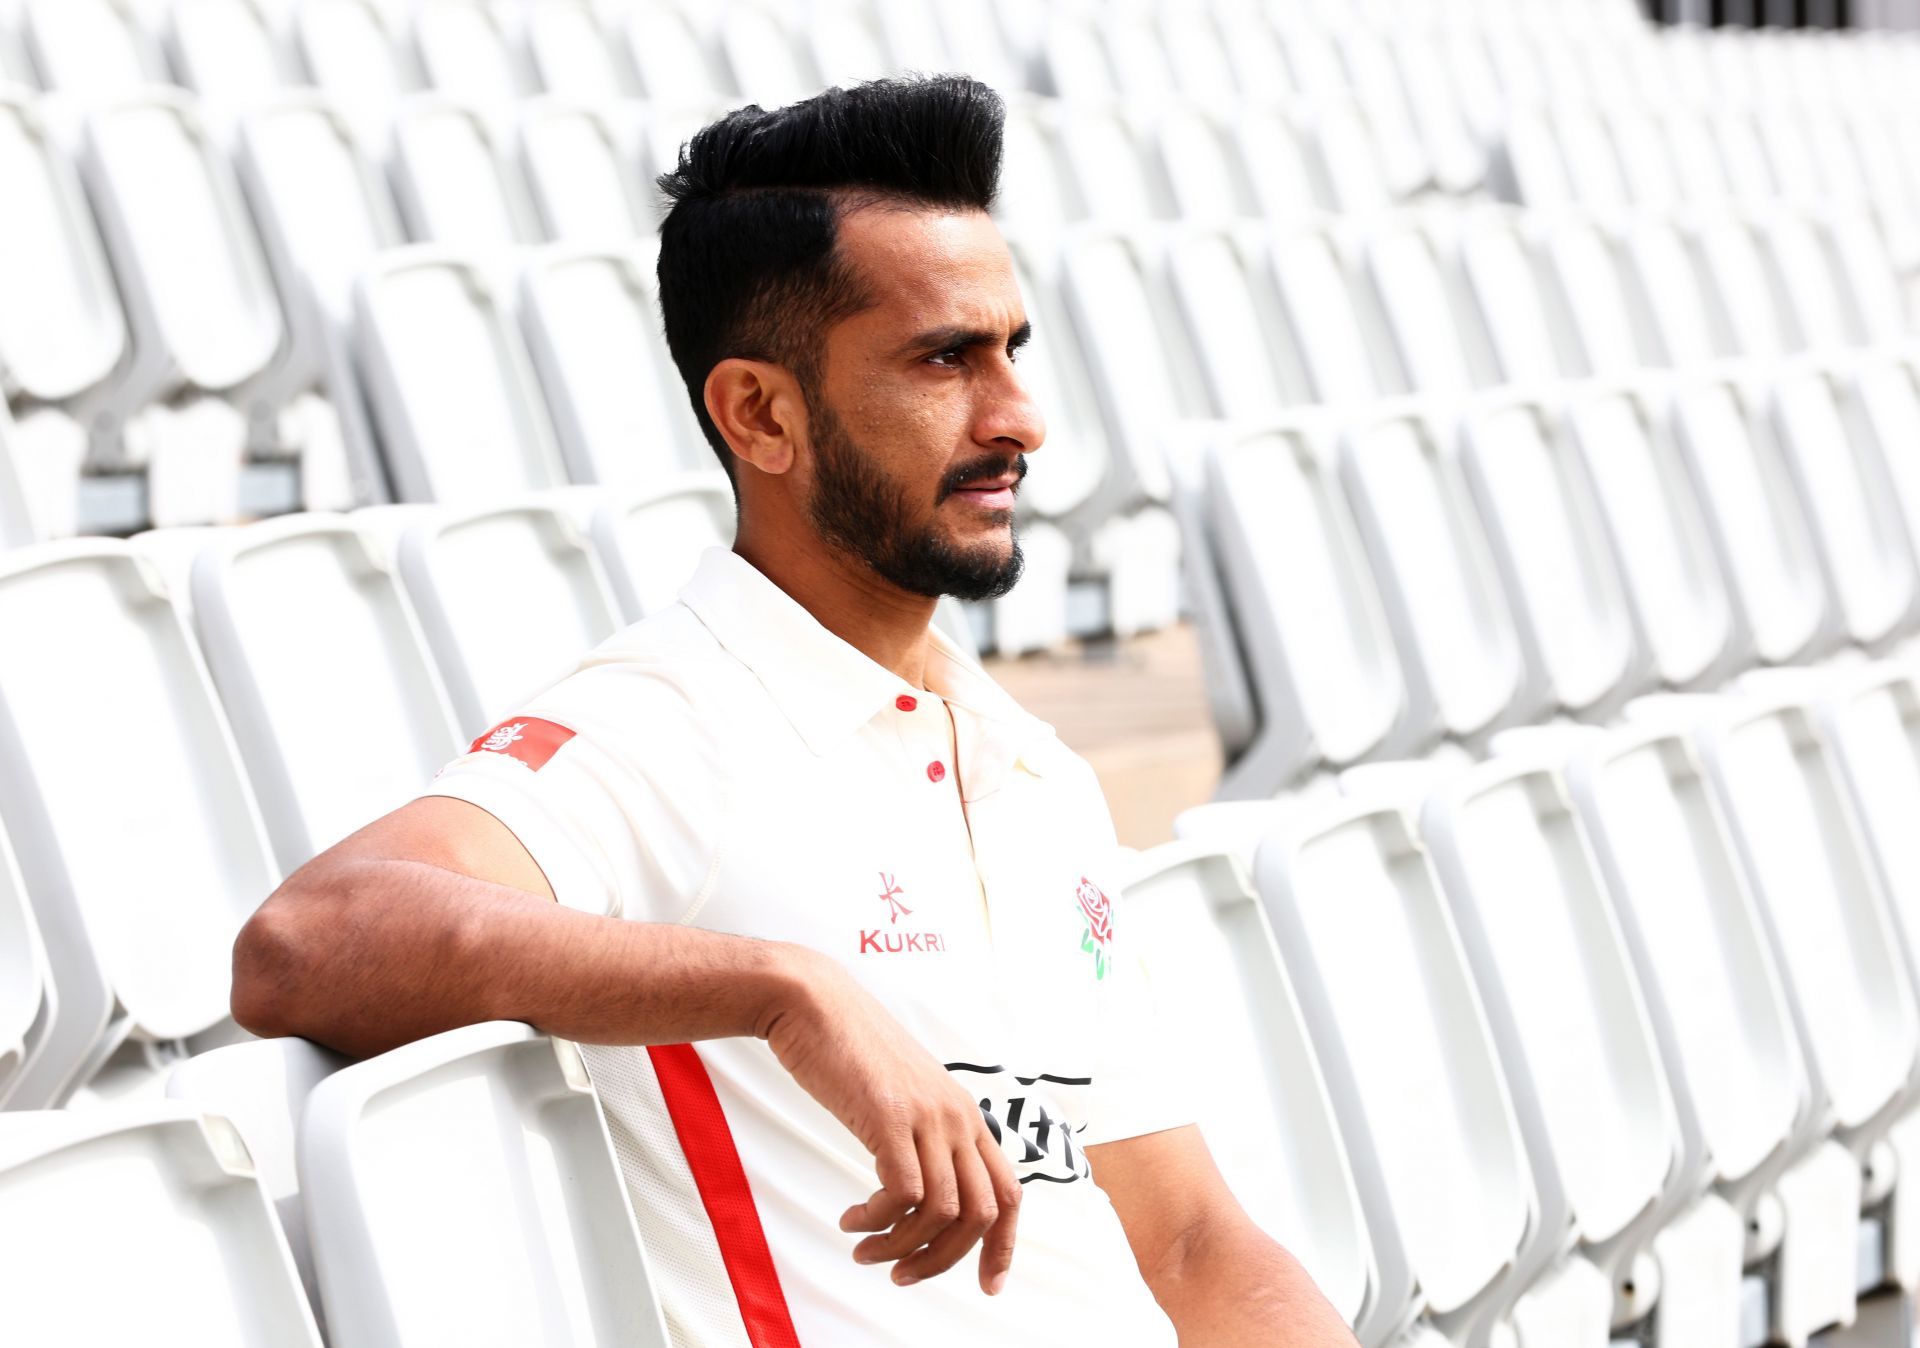 Hasan Ali is all set to play in the County Championship for Lancashire (Image Credits: Getty)